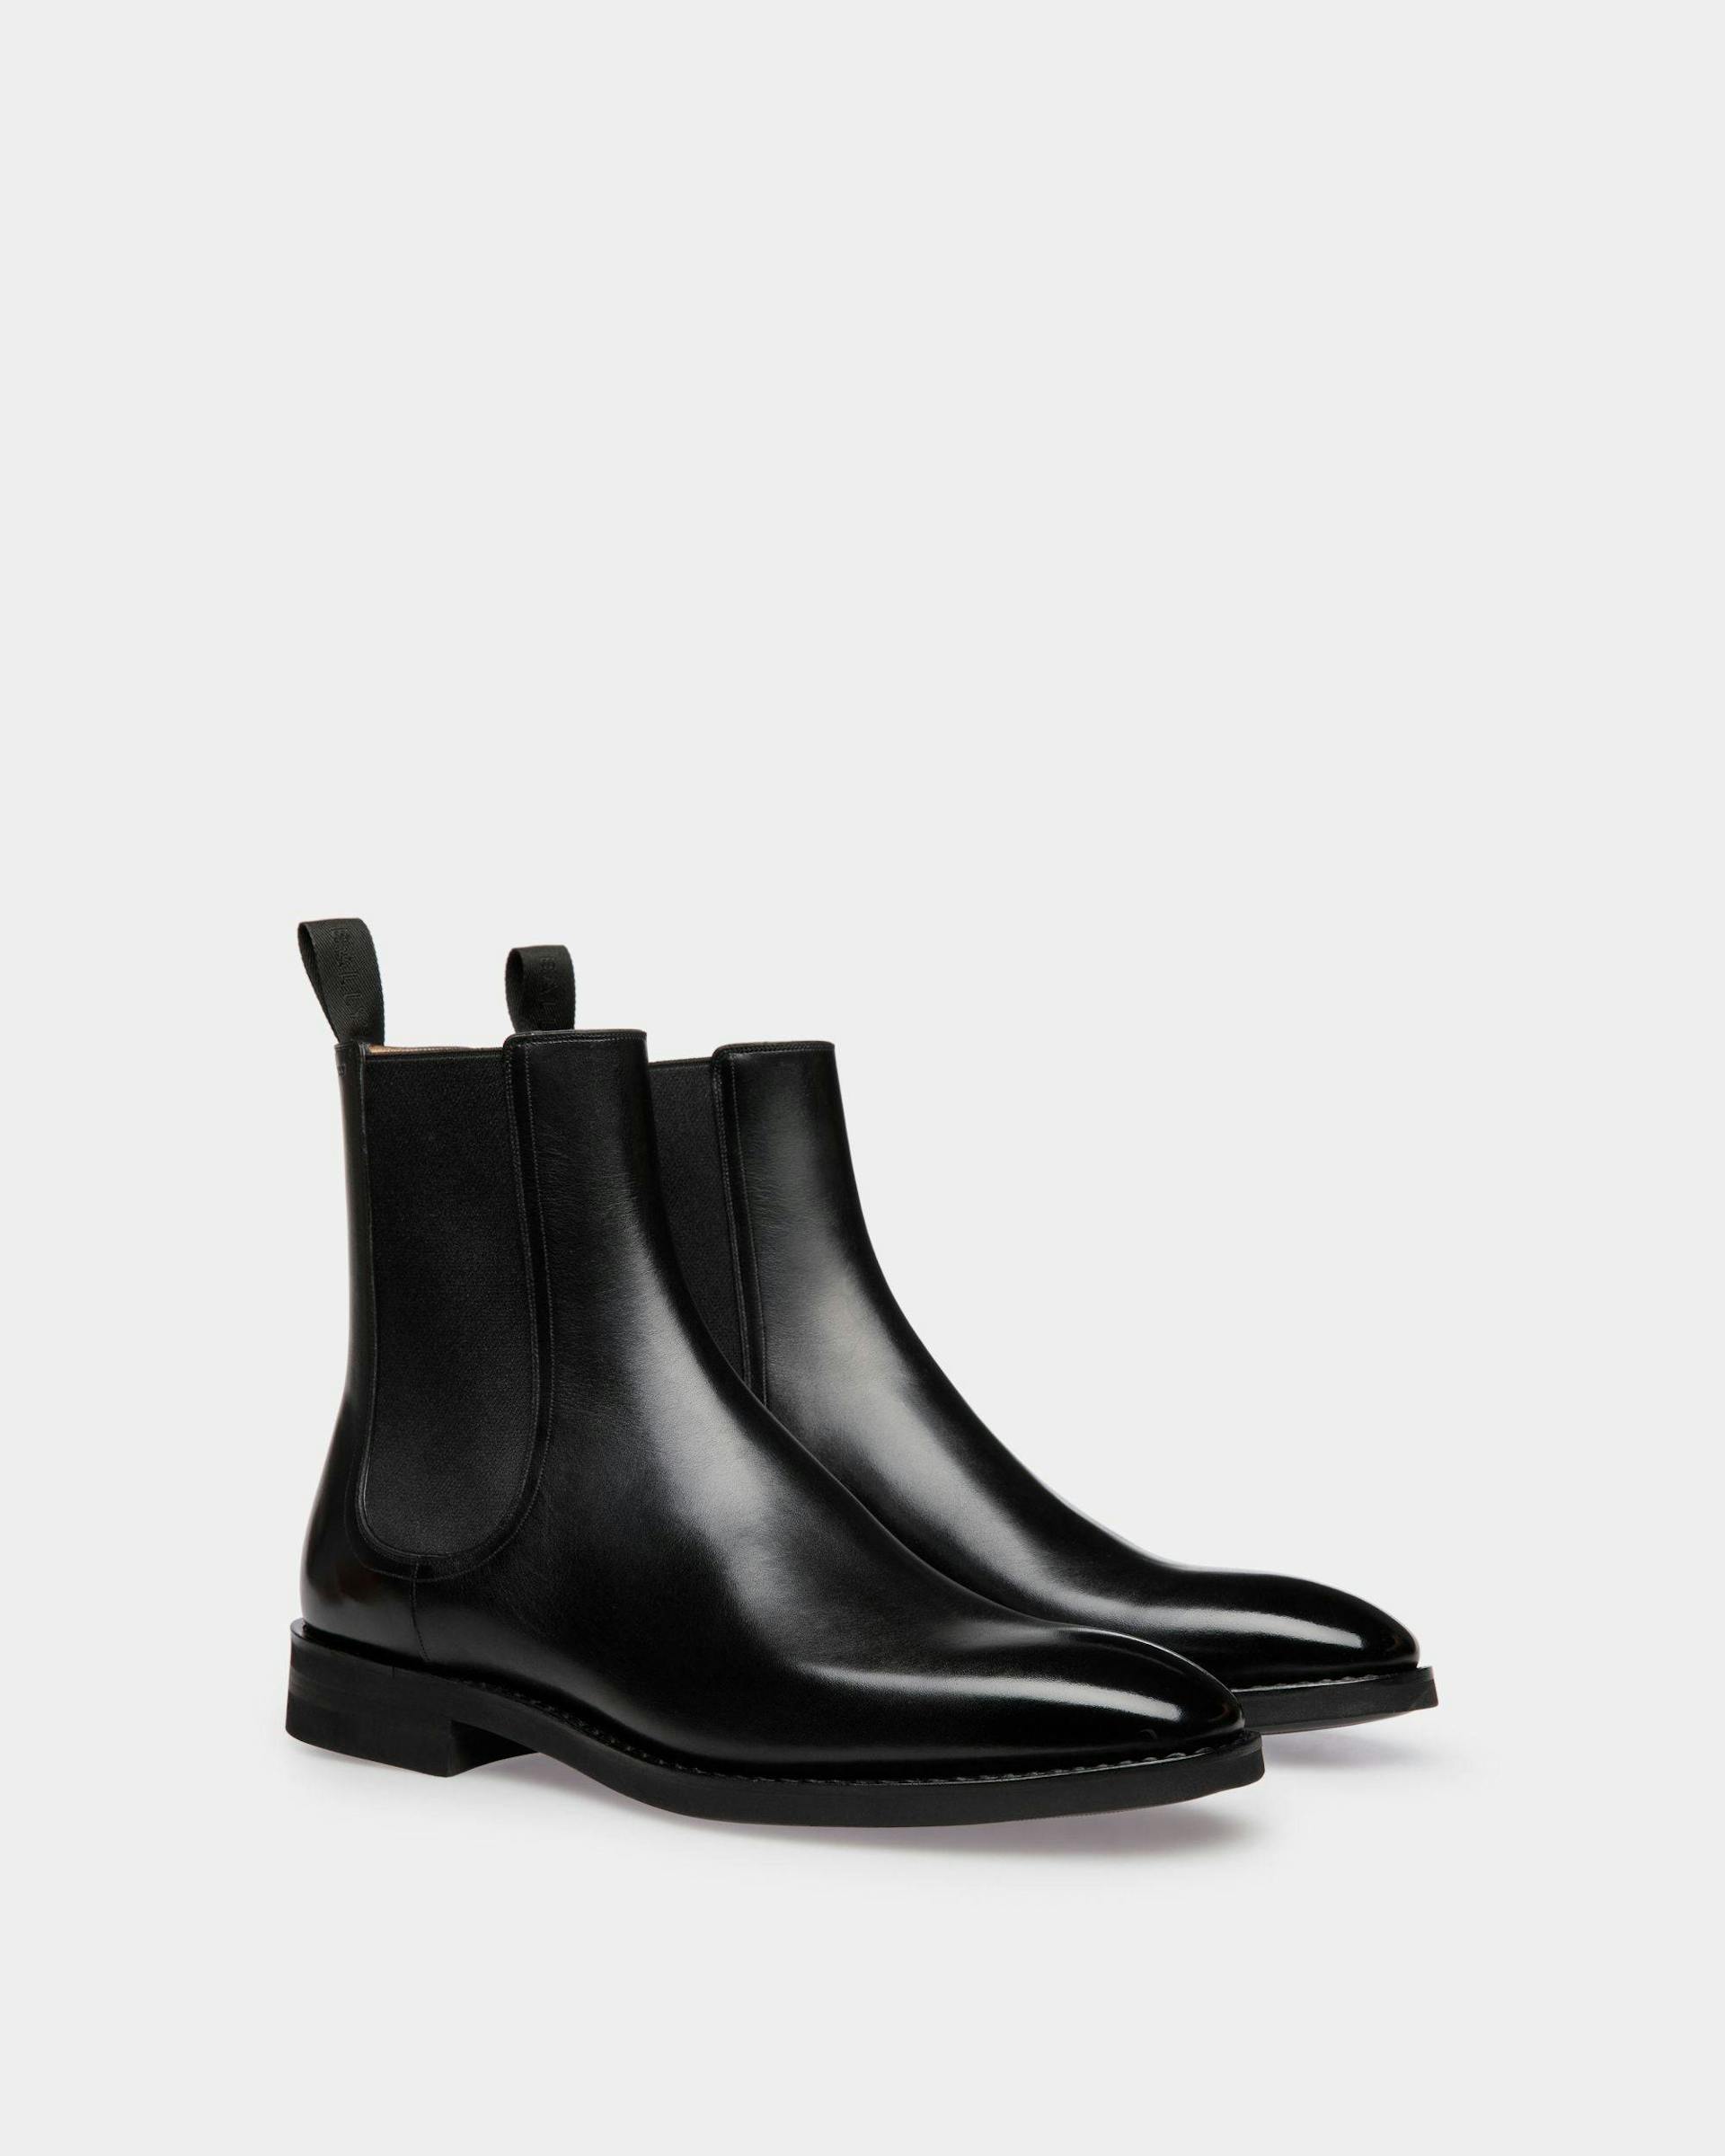 Men's Scribe Boot in Black Leather | Bally | Still Life 3/4 Front